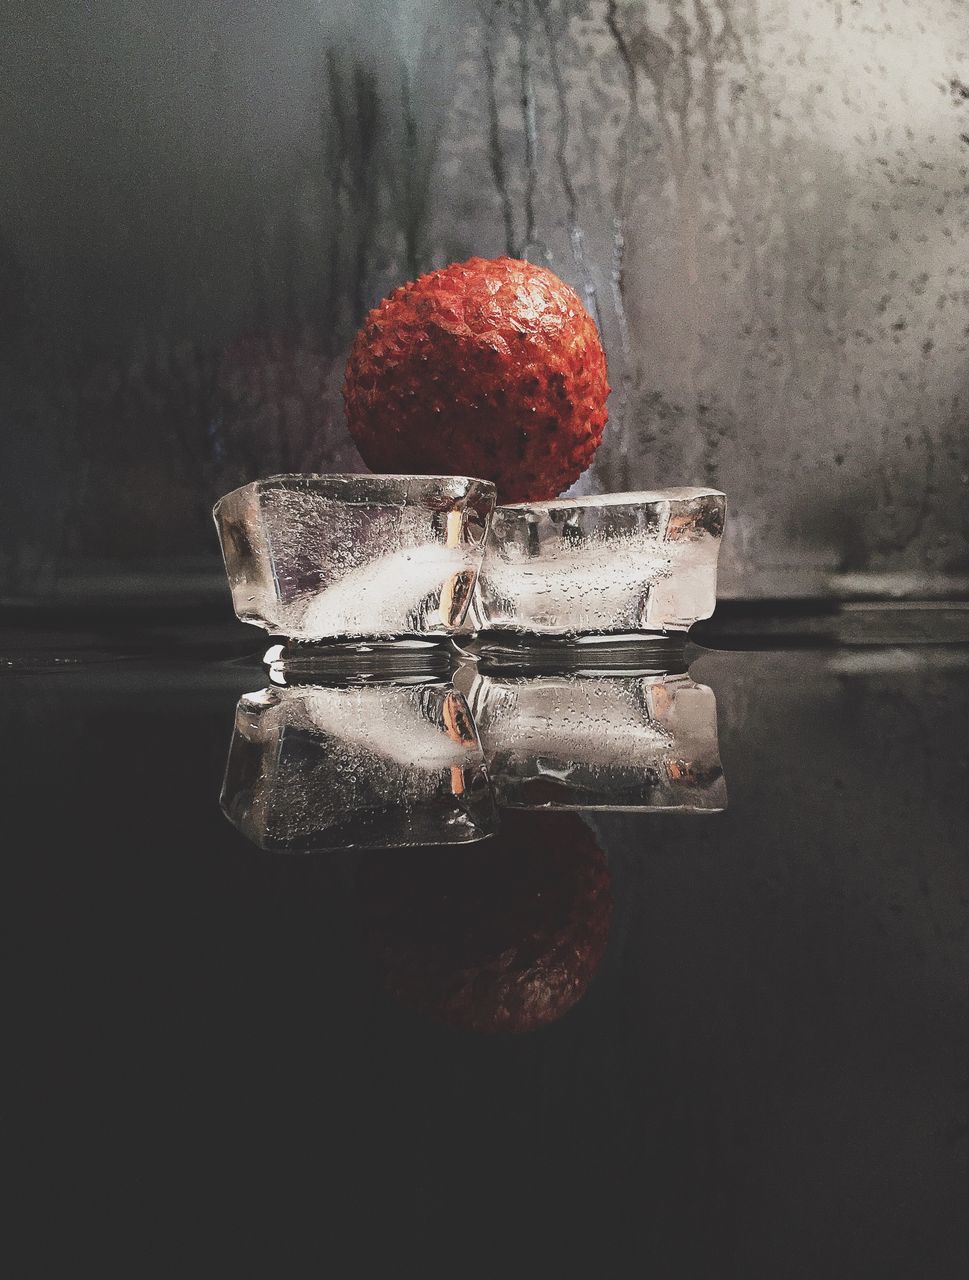 still life, red, close-up, indoors, high angle view, water, single object, table, no people, wet, wall - building feature, freshness, food and drink, damaged, wood - material, day, glass - material, metal, drop, two objects